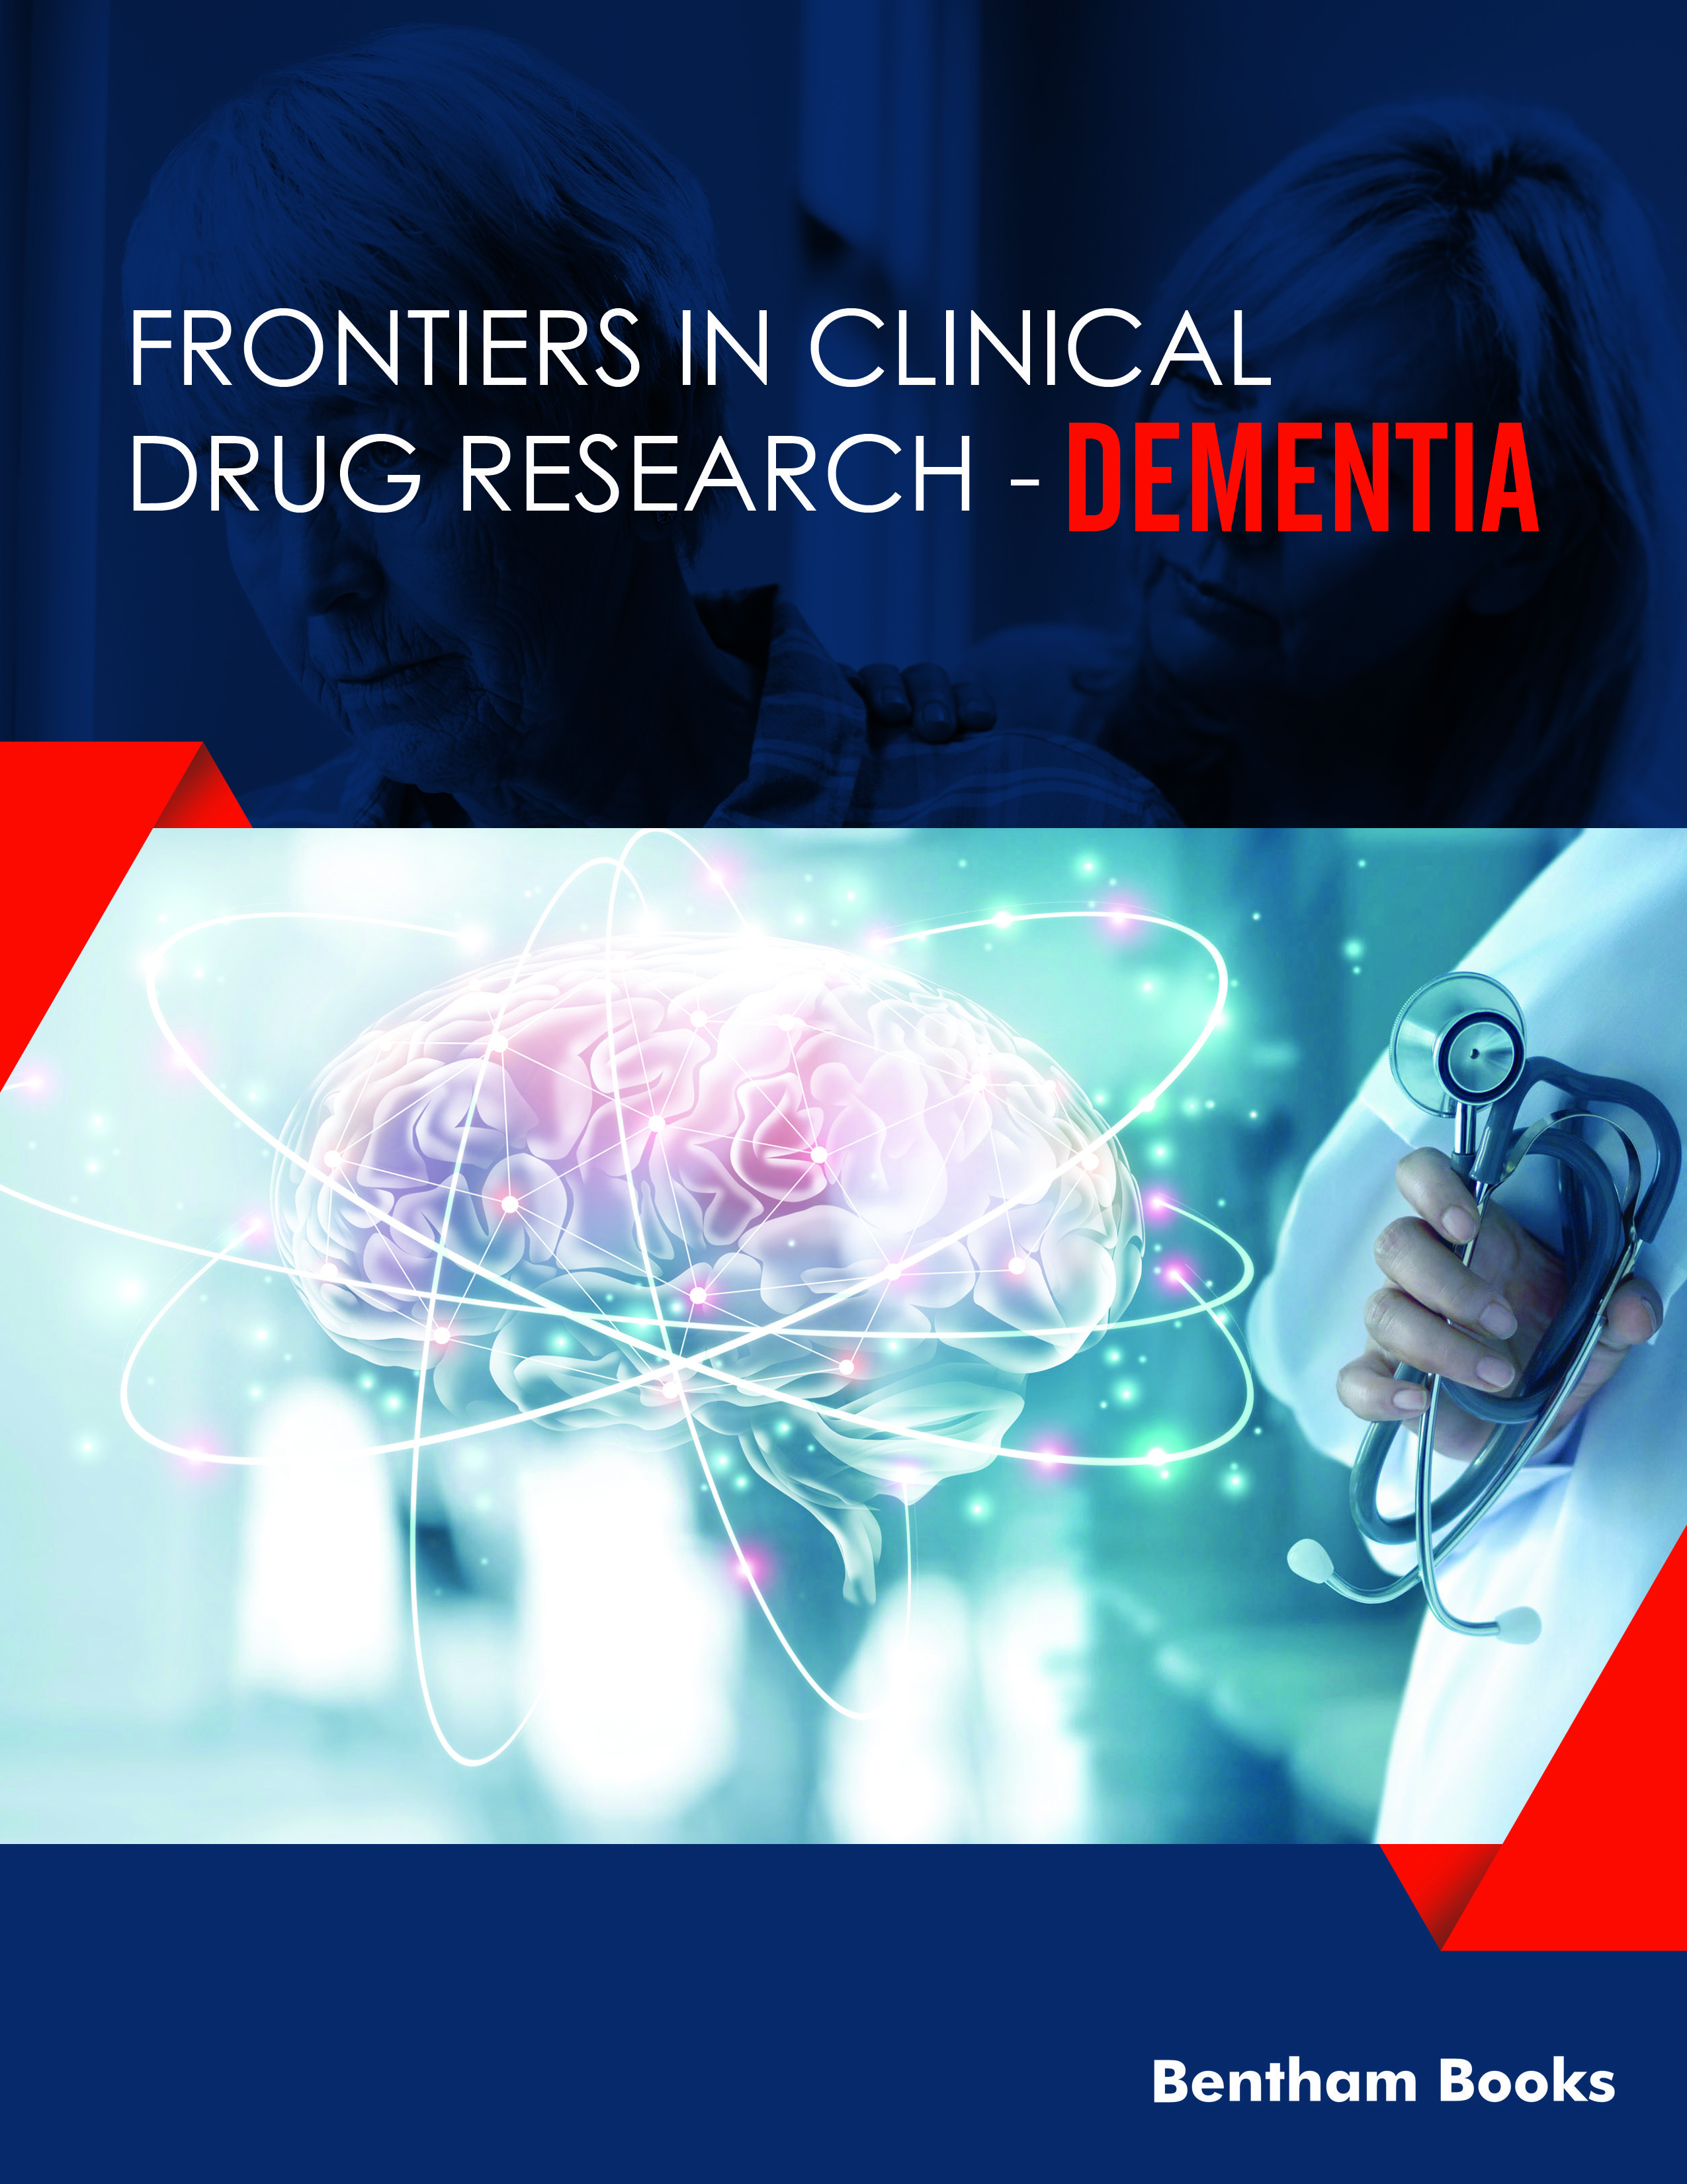 Frontiers in Clinical Drug Research-Dementia